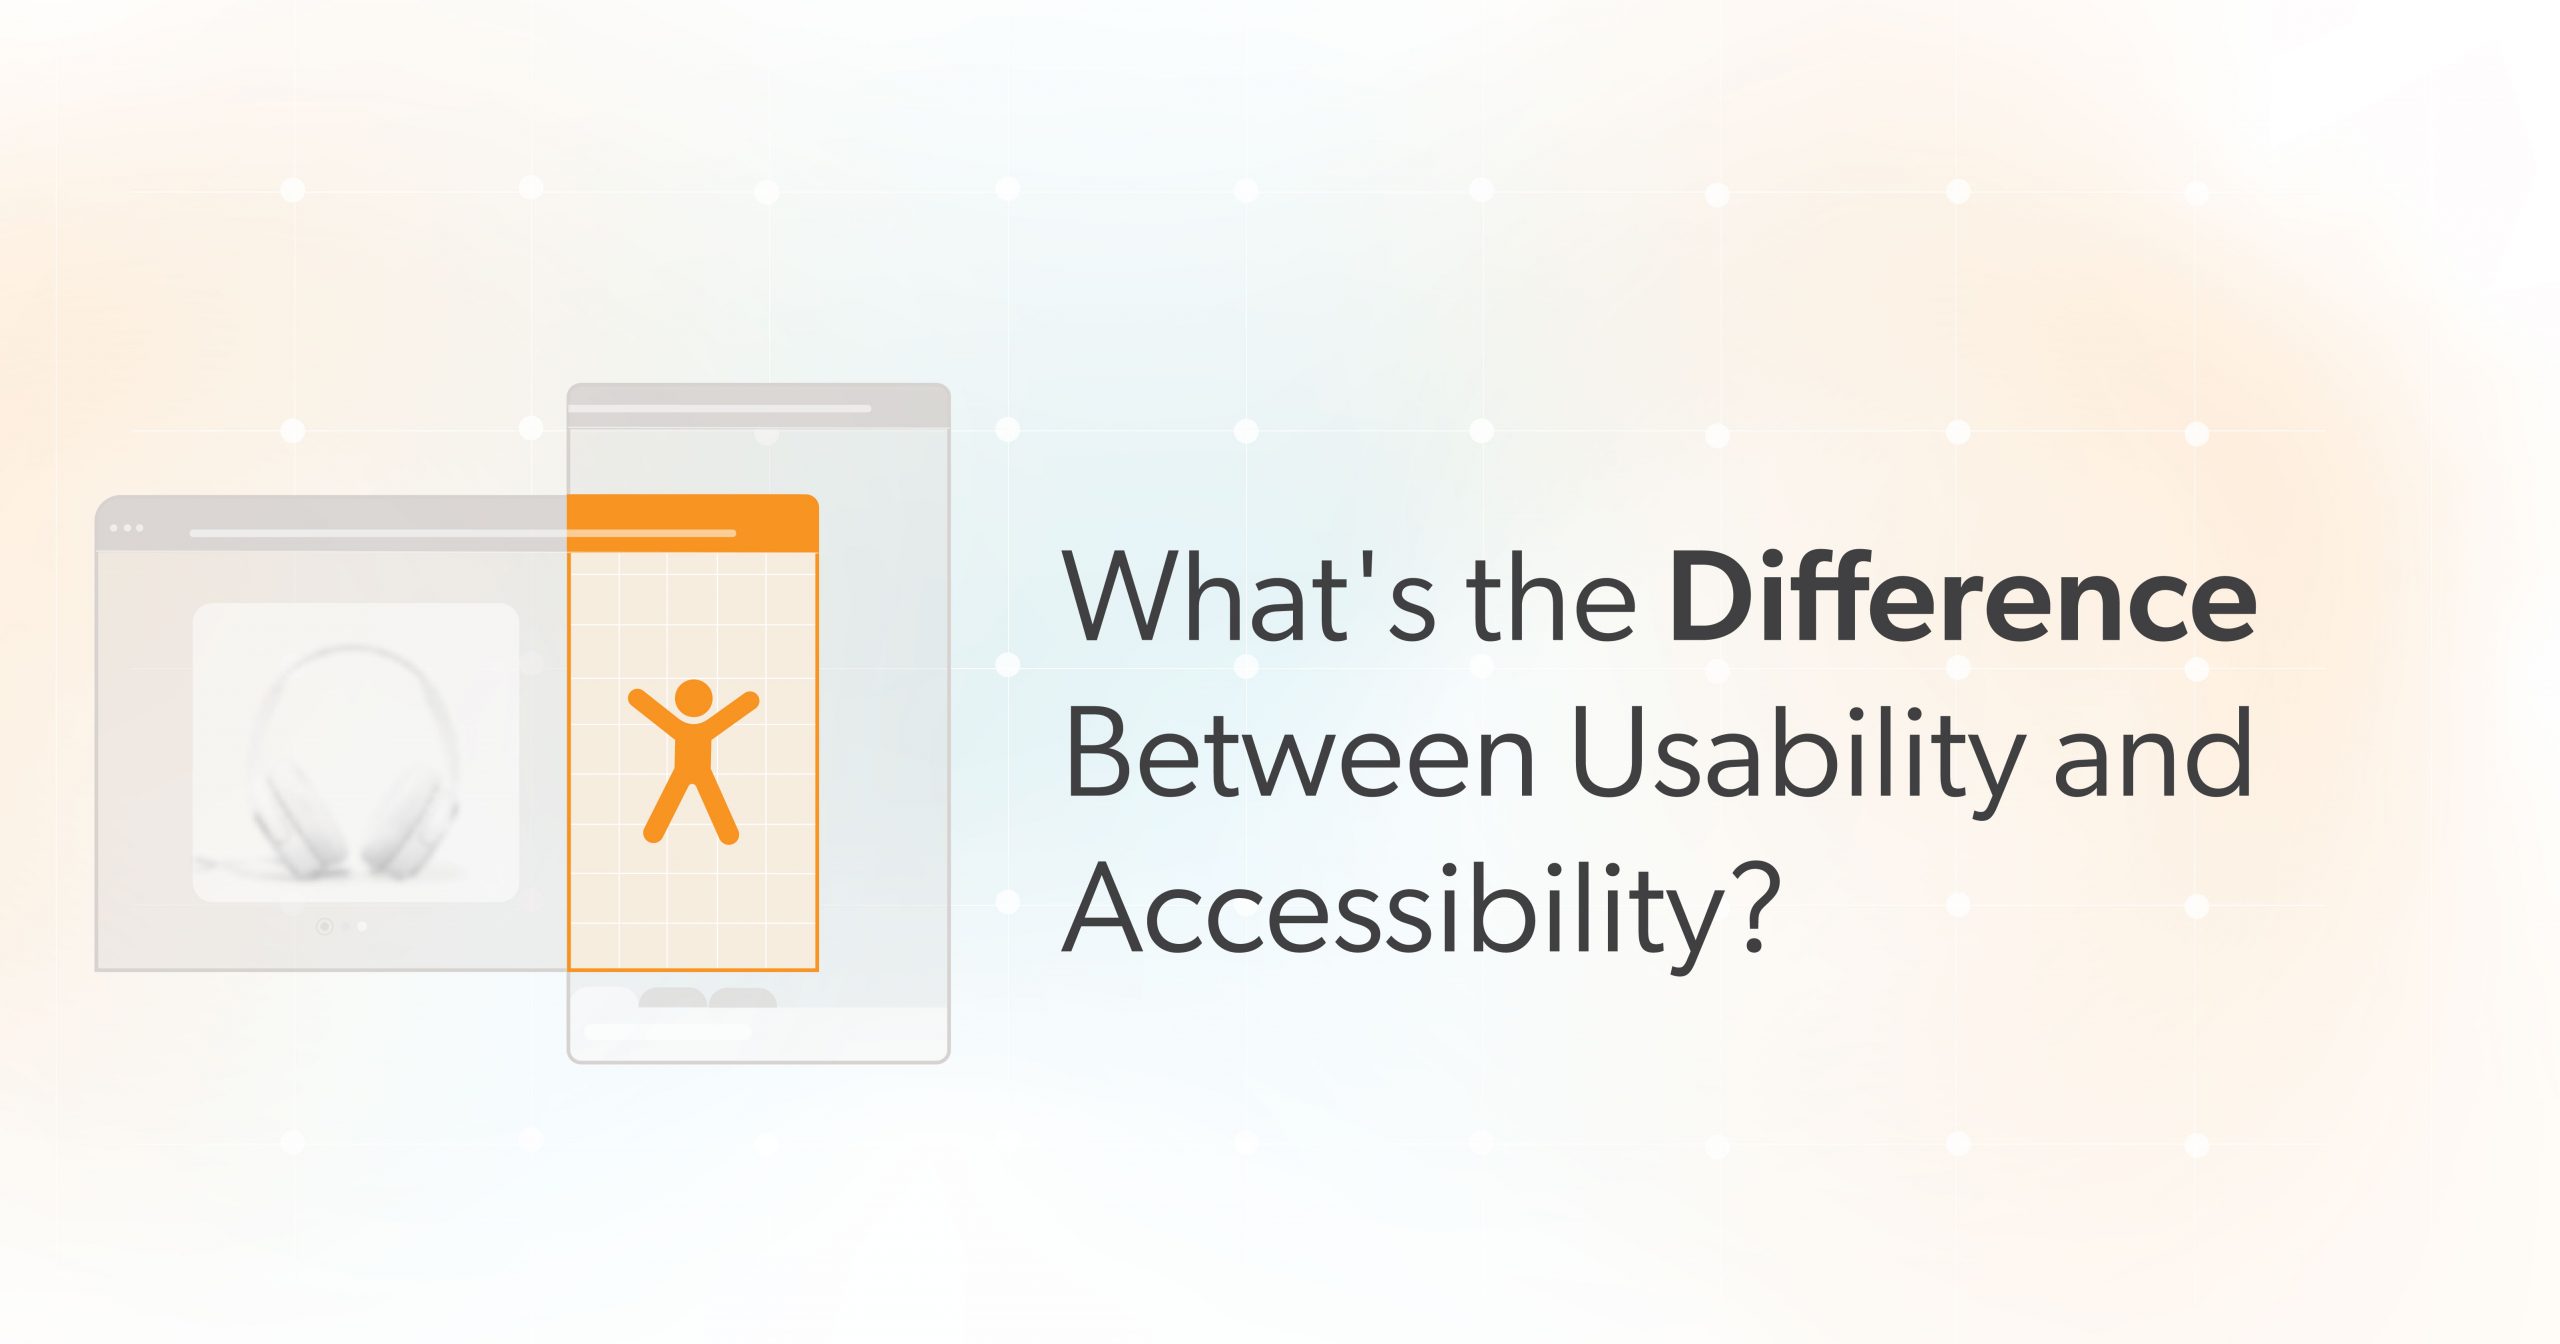 What’s the Difference Between Usability and Accessibility?